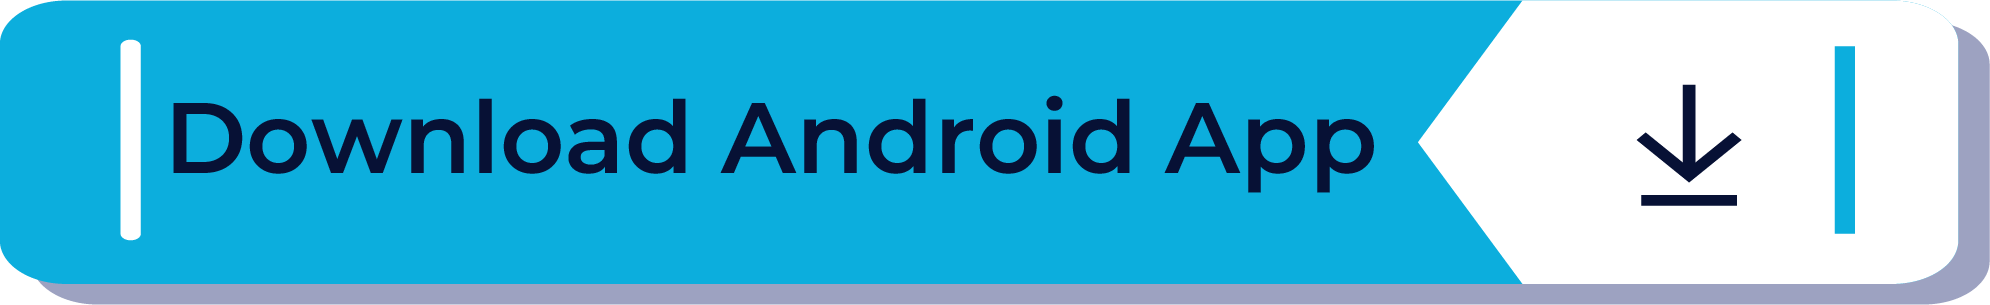 Donwload Android App